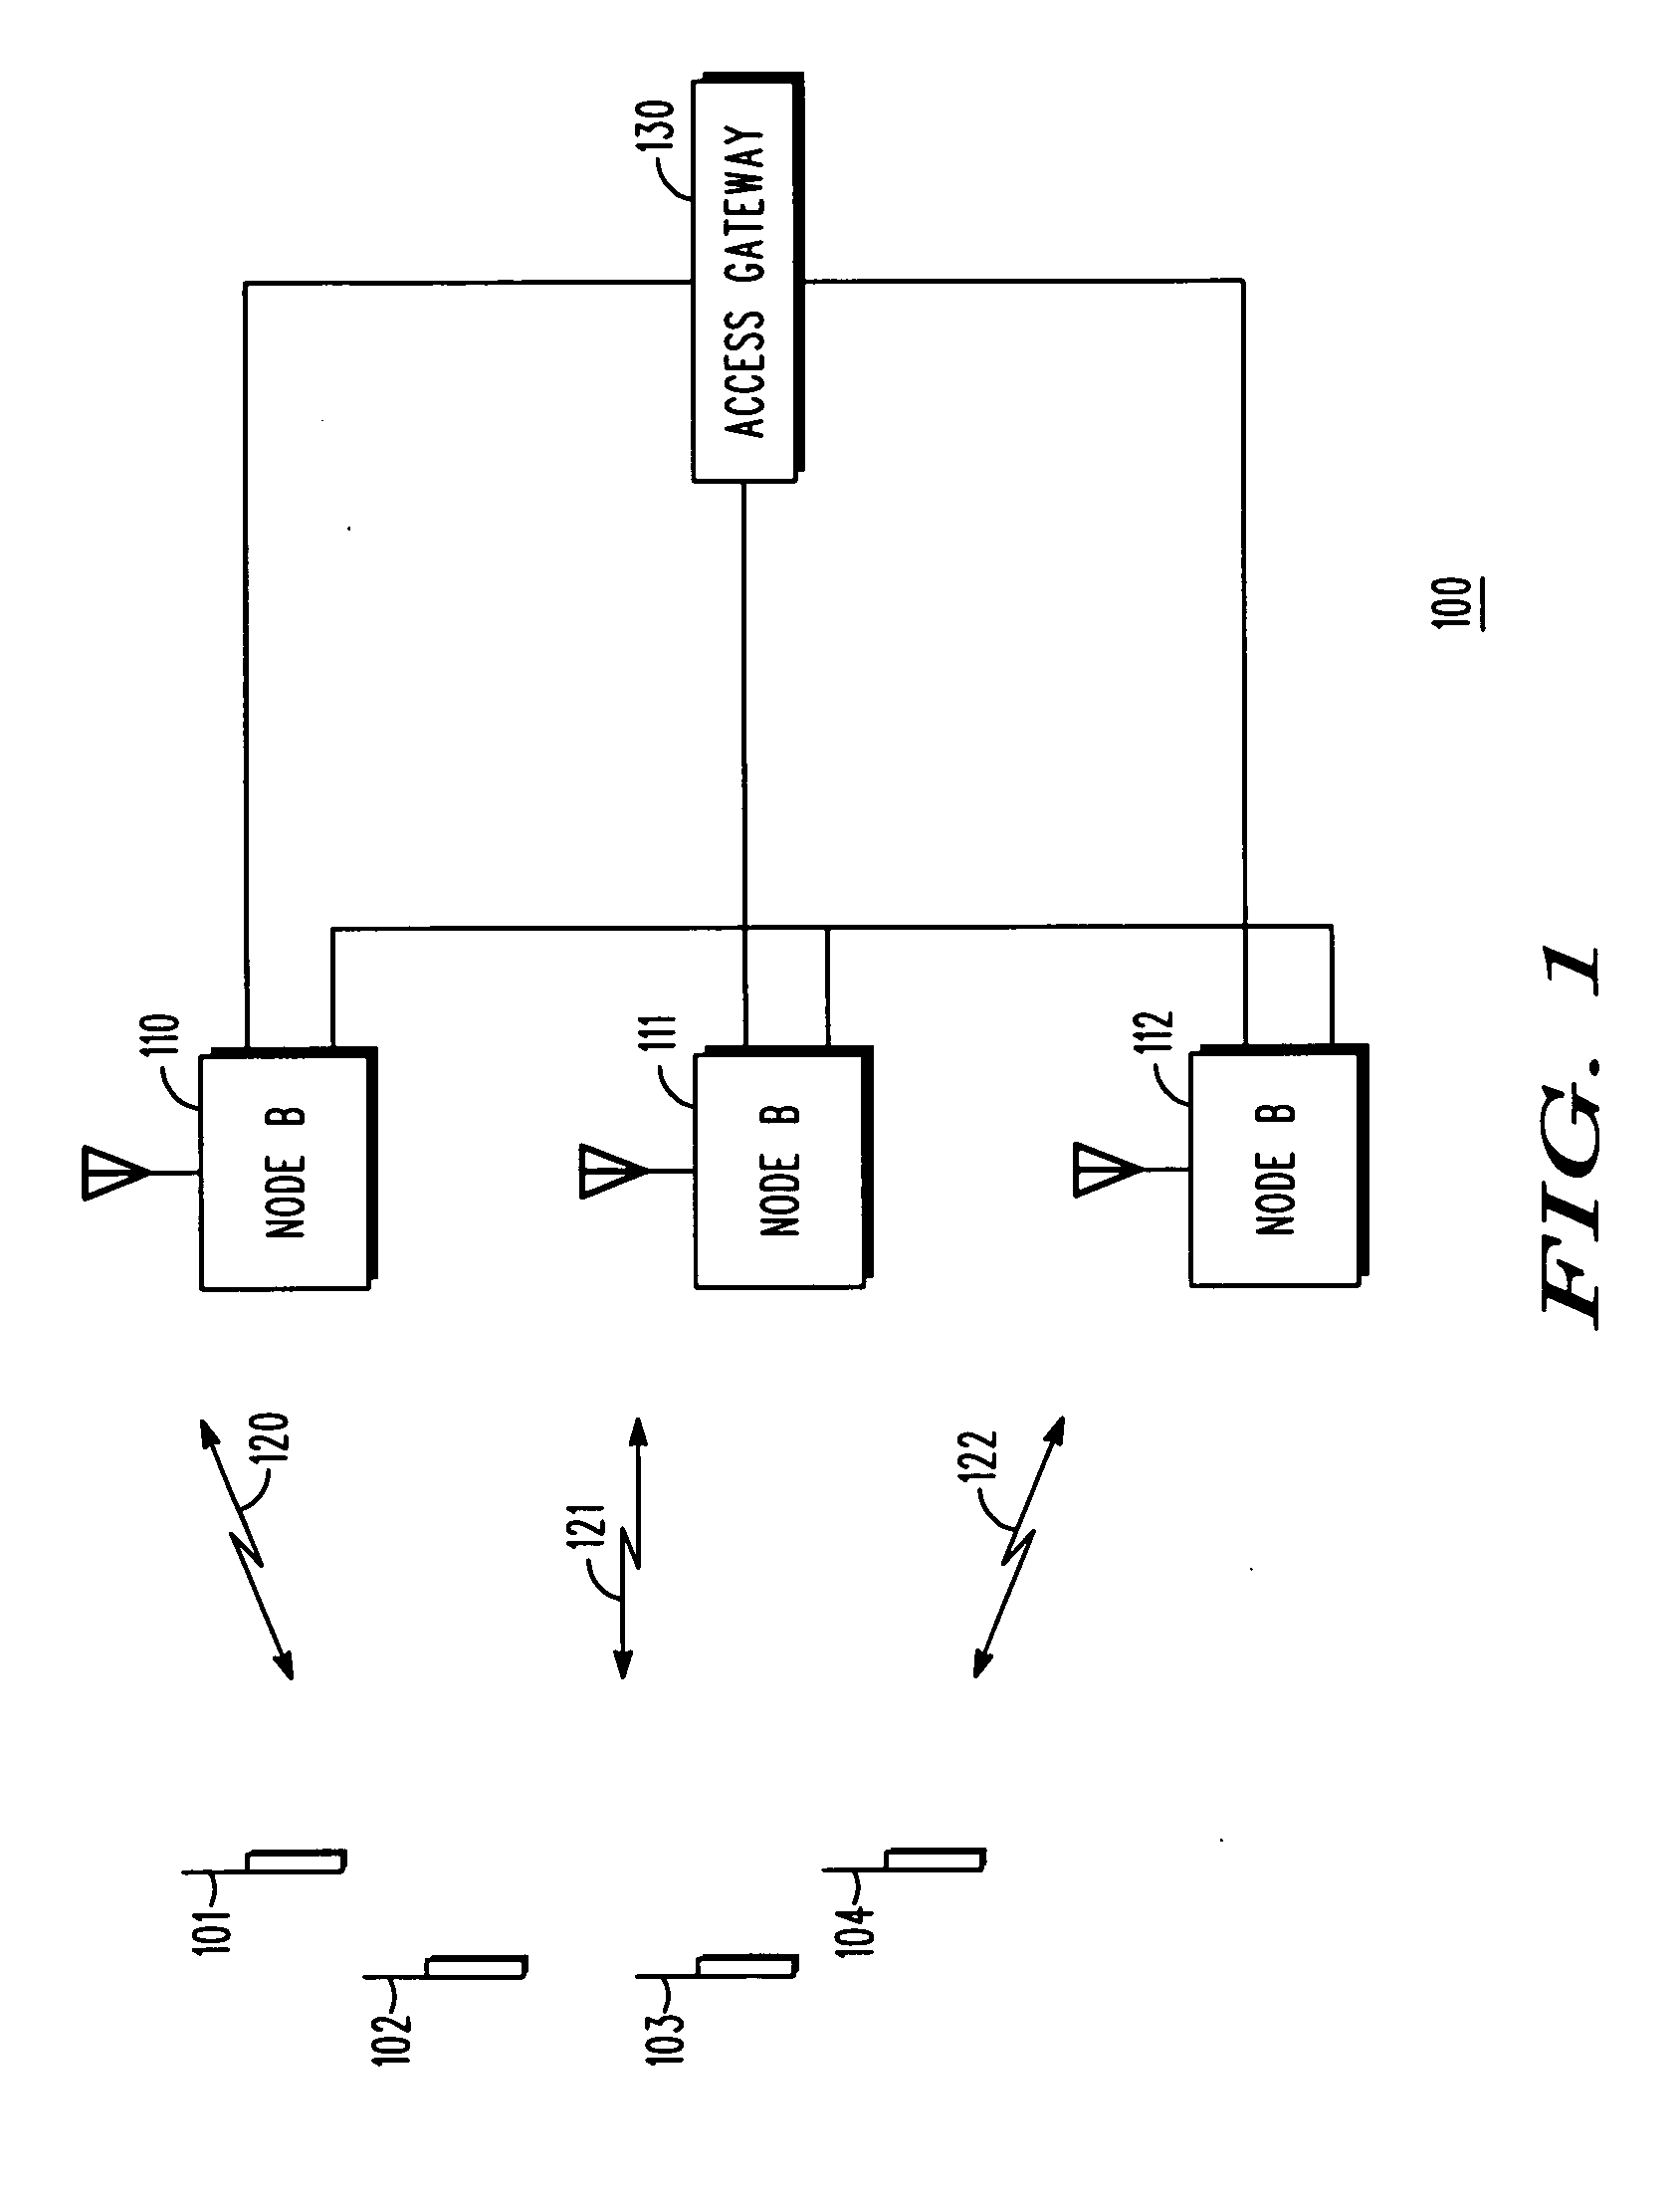 Method and apparatus for uplink power control in a communication system